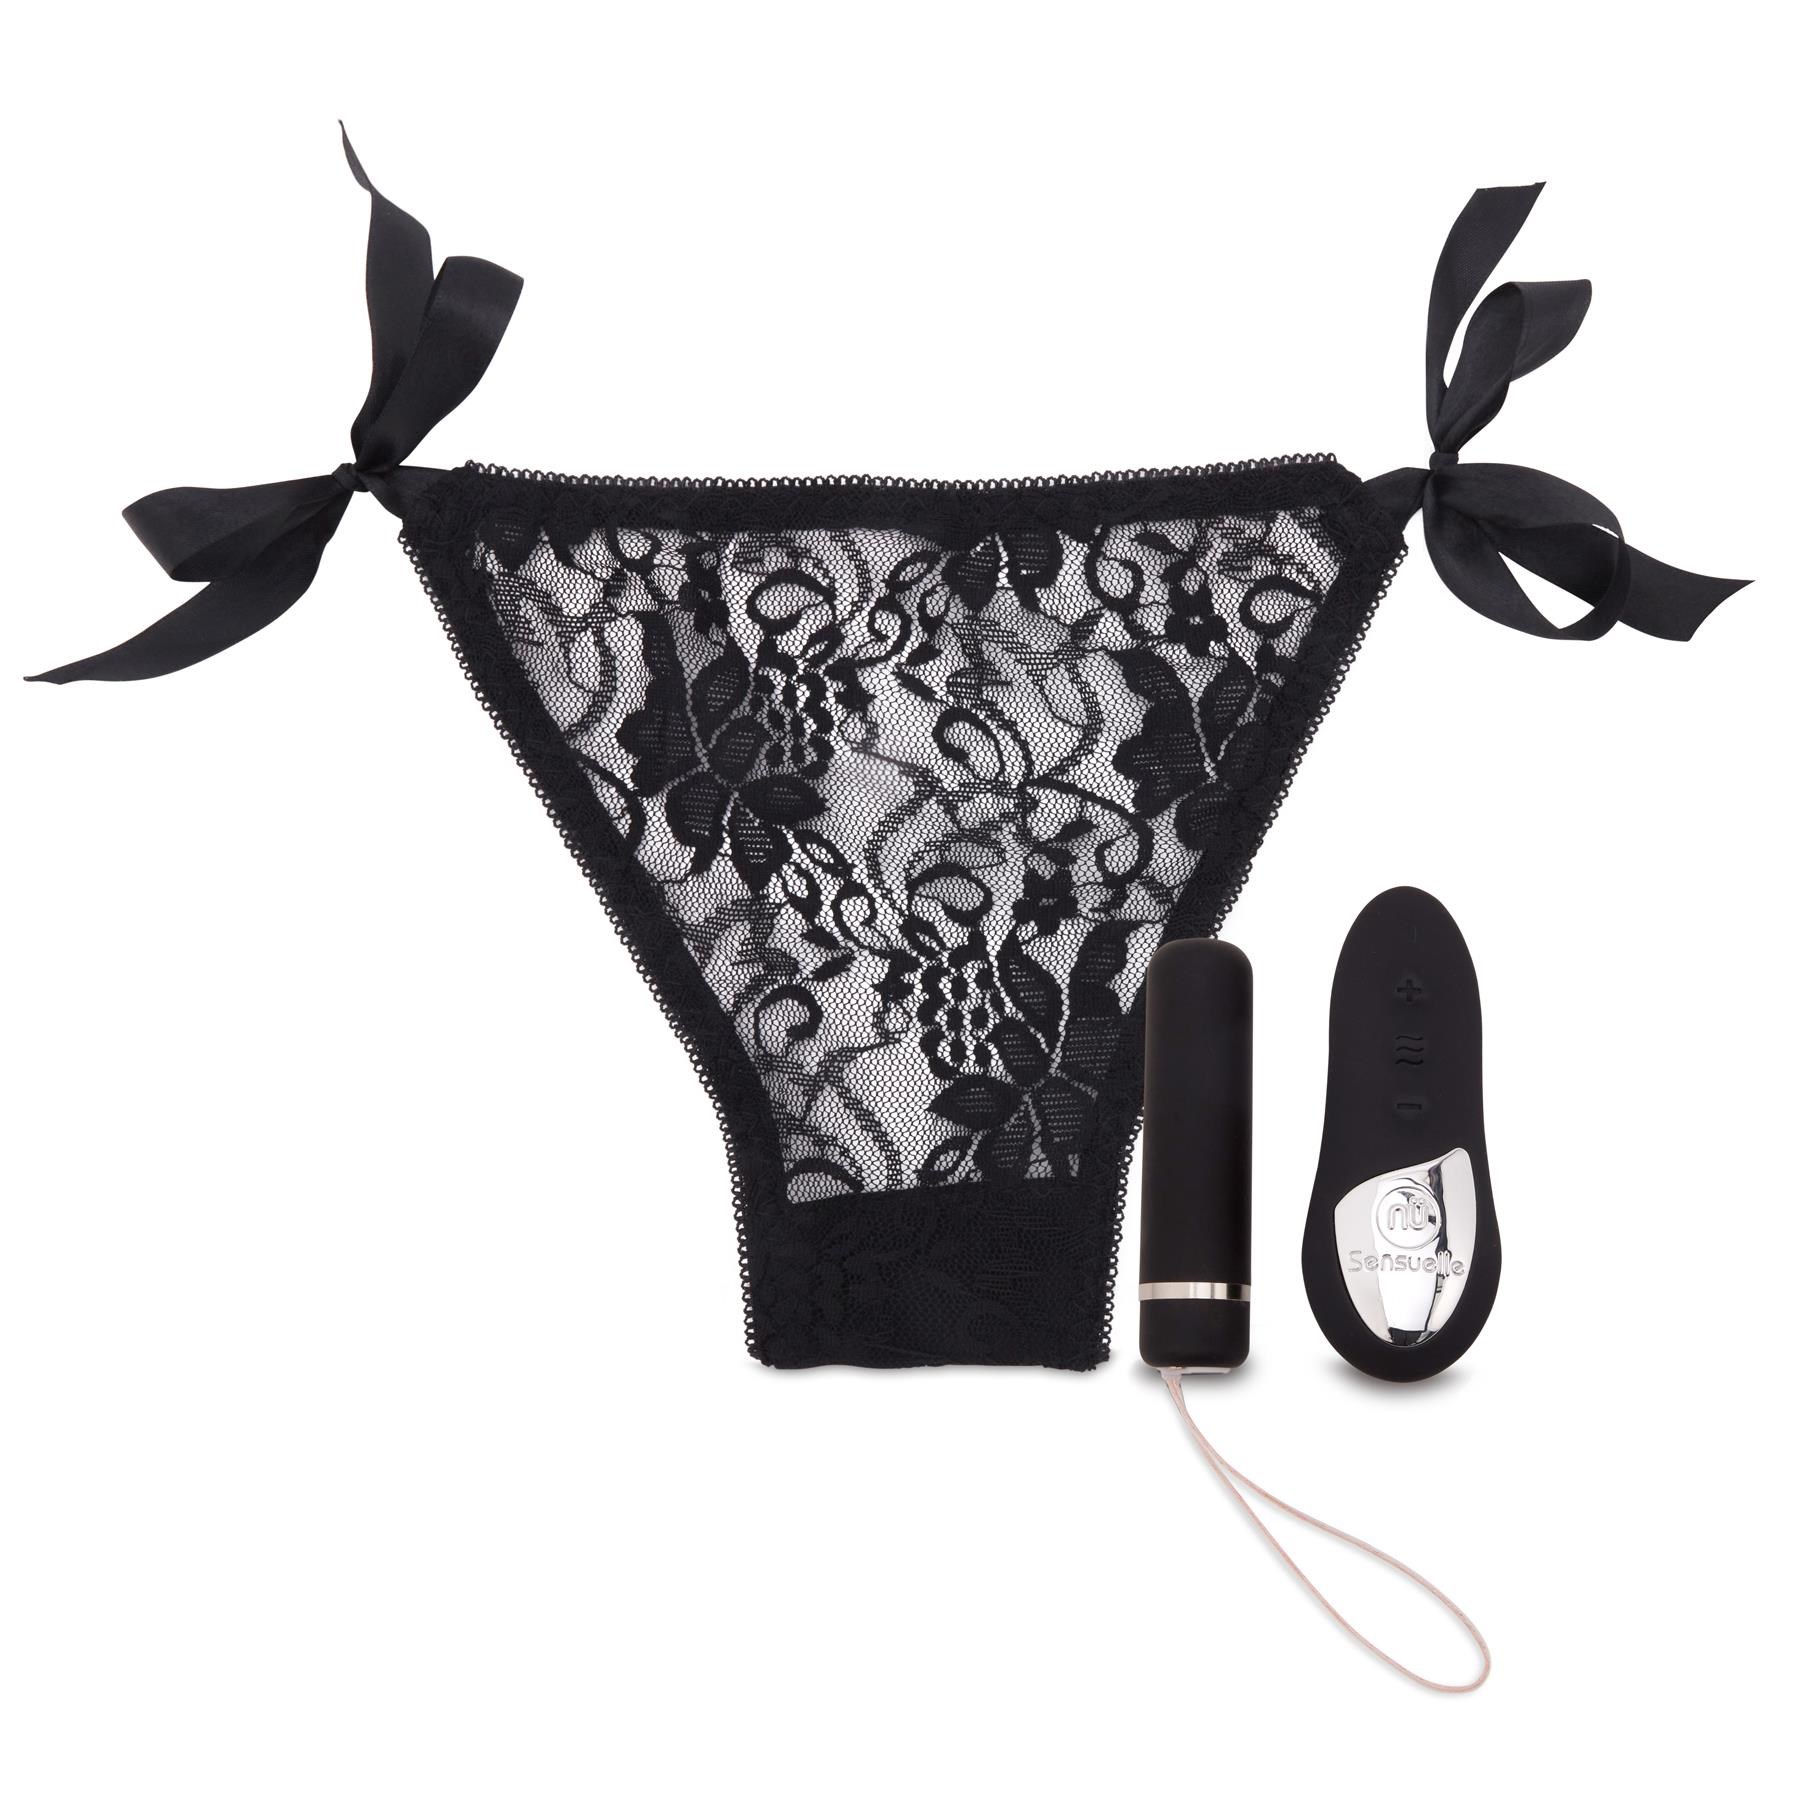 Nu Sensuelle Pleasure Panty With Remote Control - Product, Remote and Panty - Black